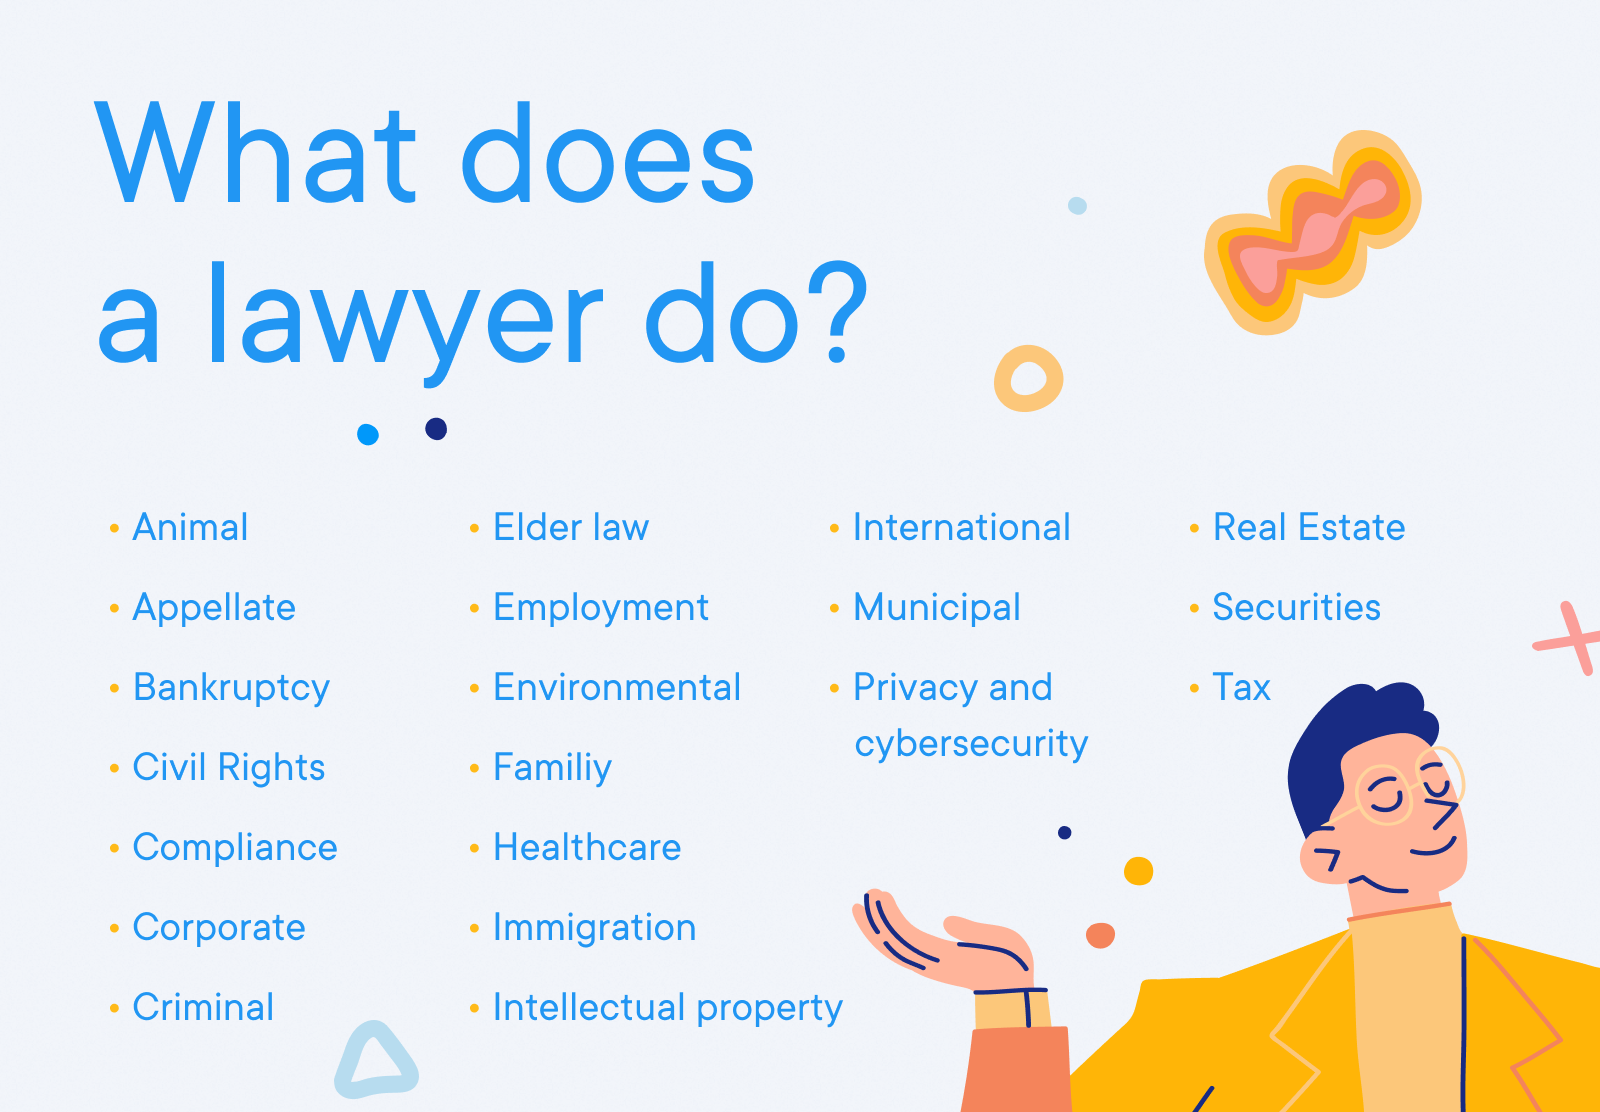 Lawyer - What does a lawyer do?